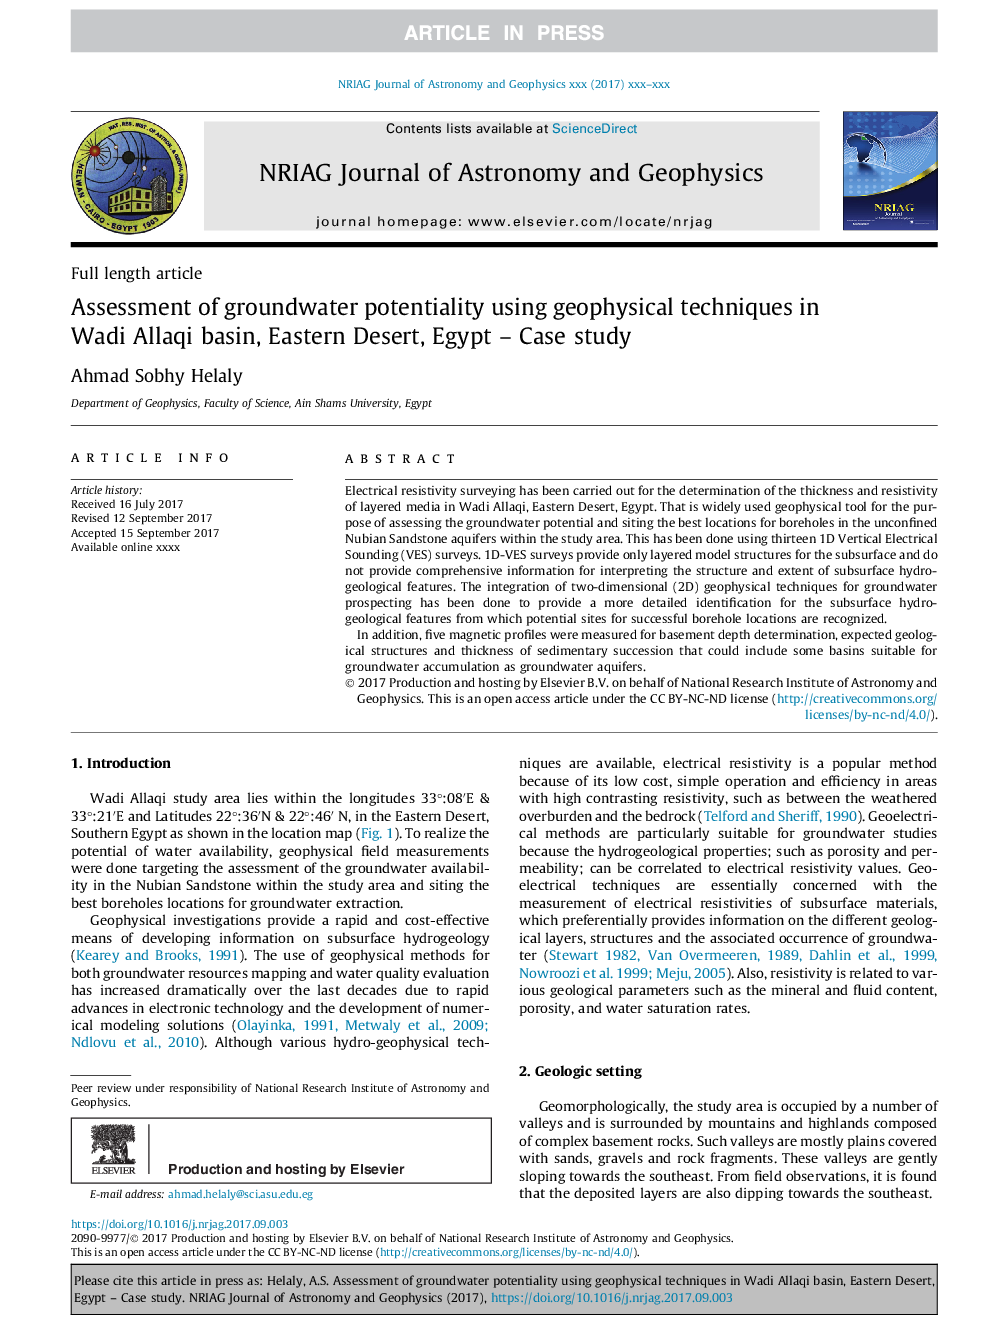 Assessment of groundwater potentiality using geophysical techniques in Wadi Allaqi basin, Eastern Desert, Egypt - Case study